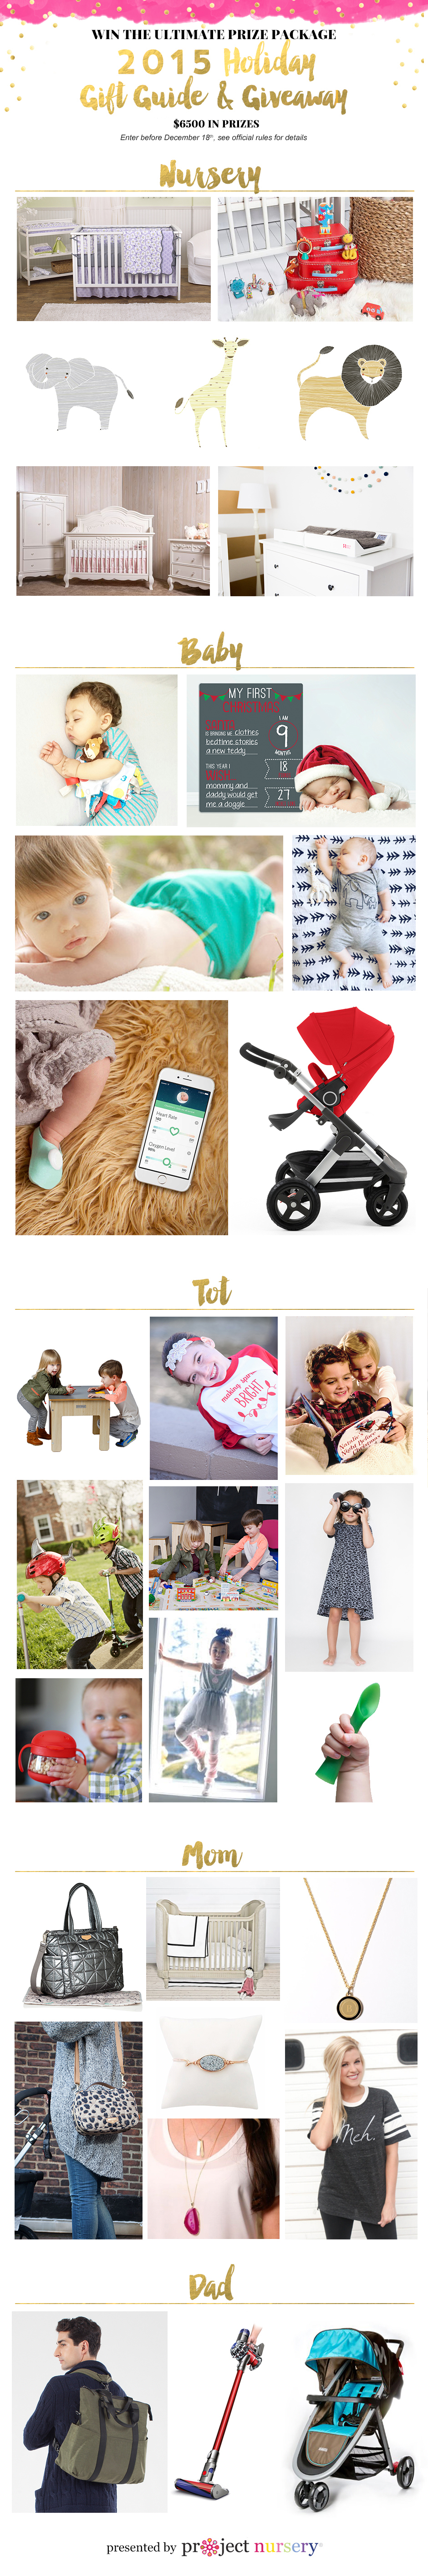 Project Nursery 2015 Holiday Gift Guide & Giveaway